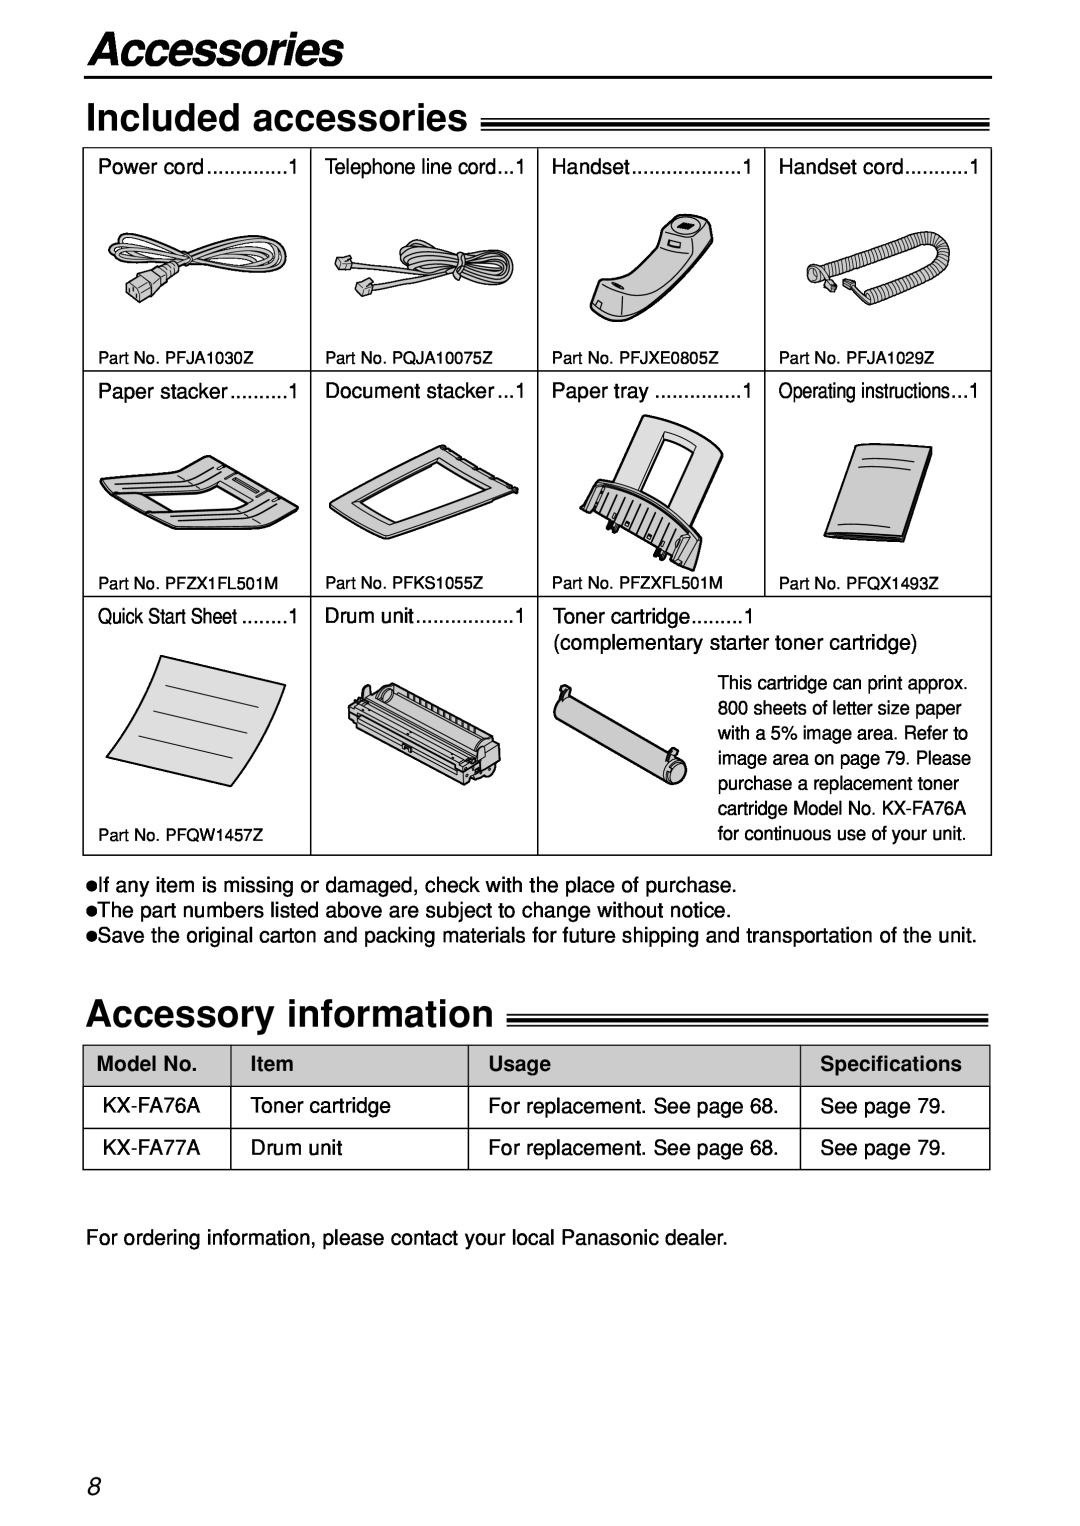 Panasonic KX-FL501C manual Accessories, Included accessories, Accessory information 